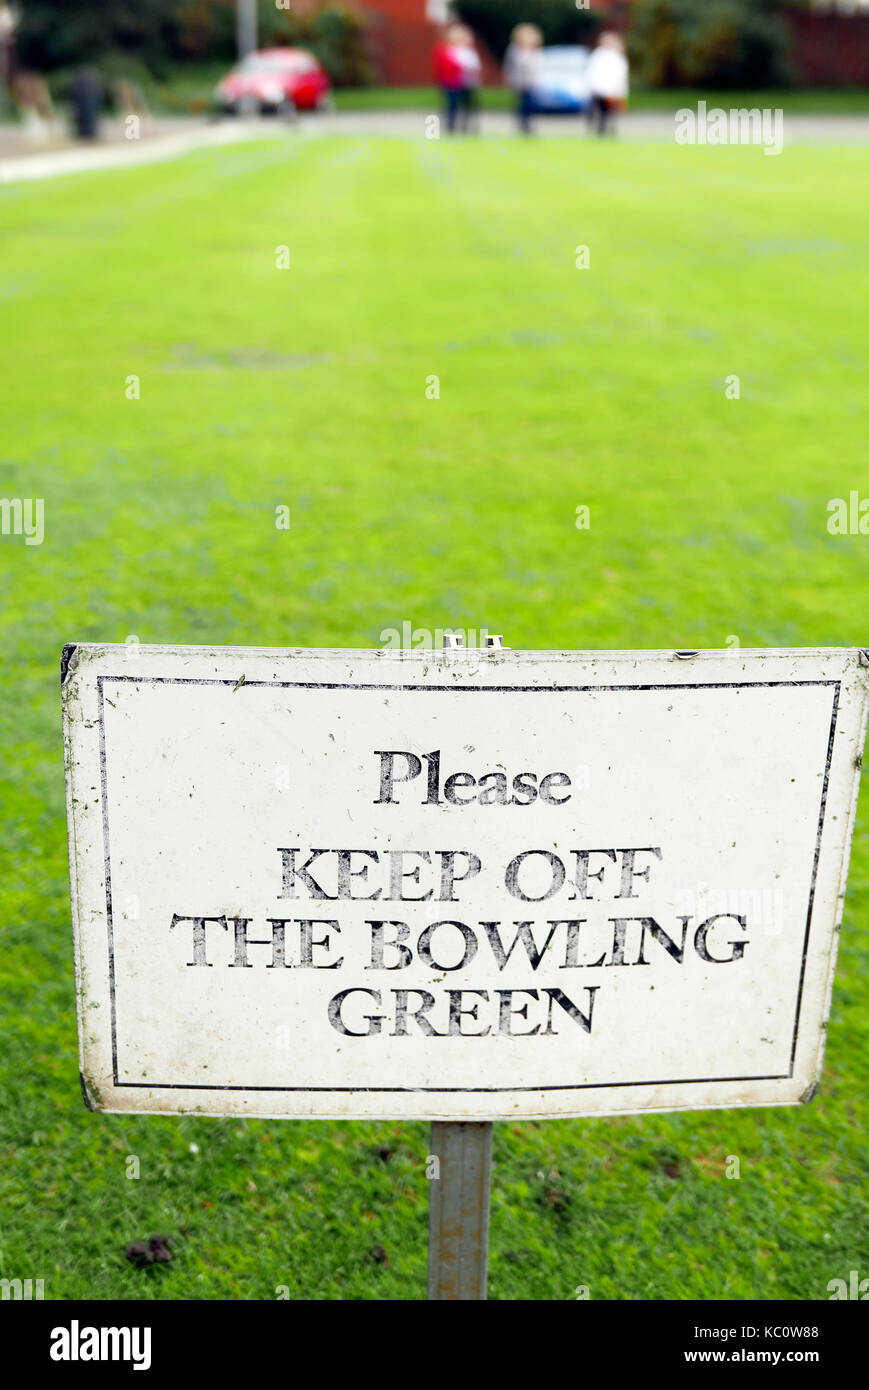 Please keep off the bowling green sign Stock Photo